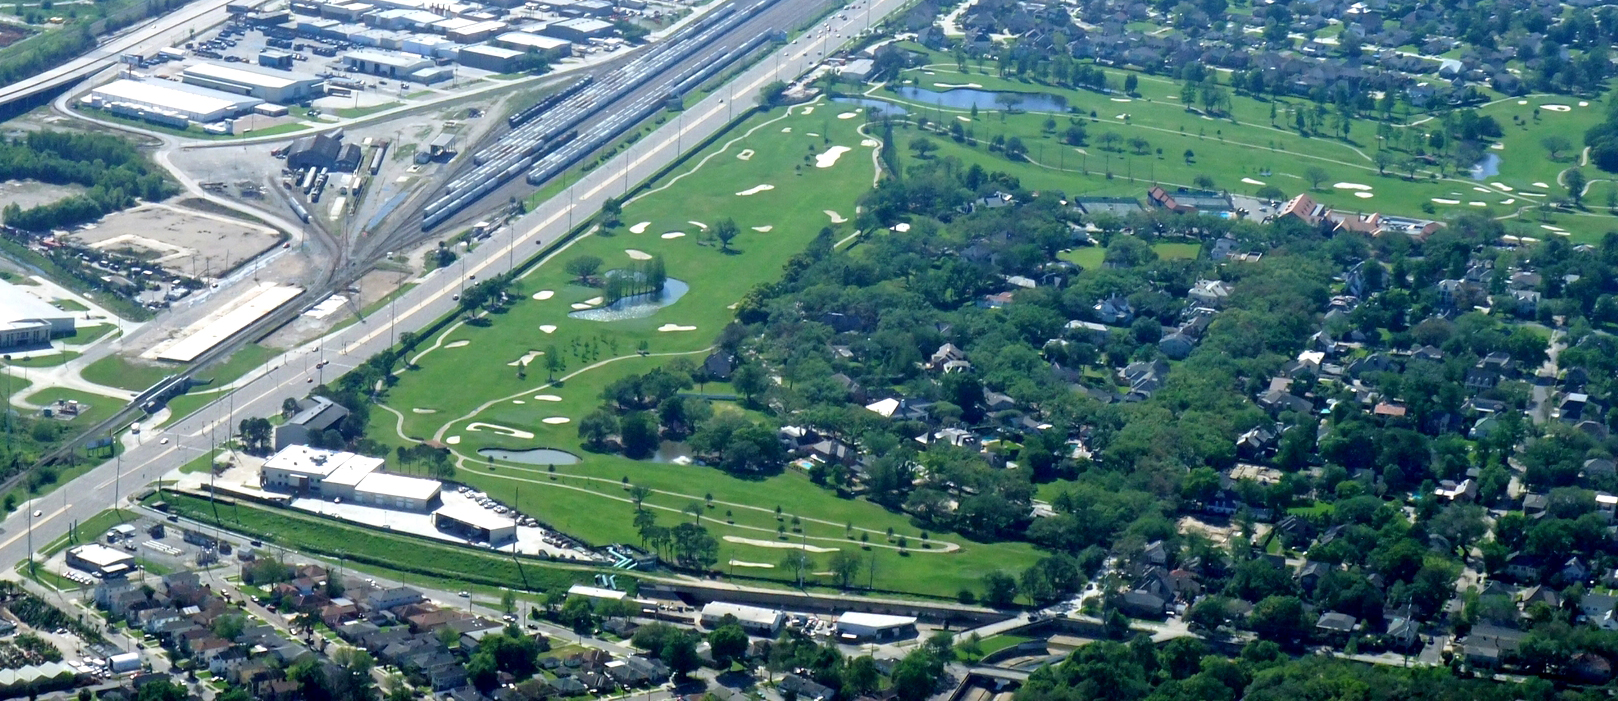 Aerial view of a golf course surrounded by buldings.